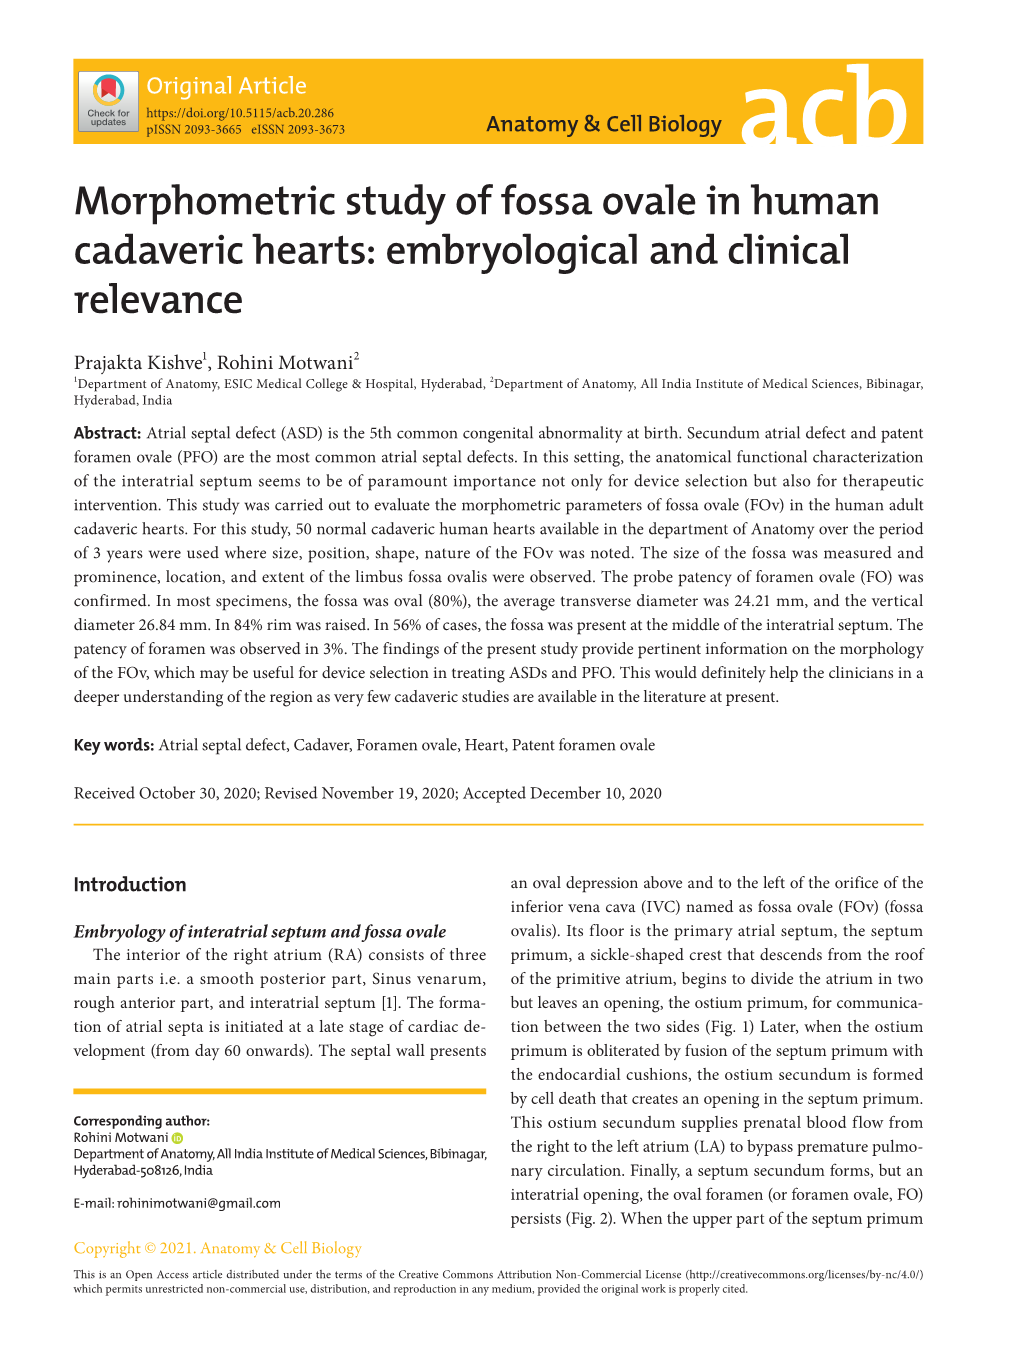 Morphometric Study of Fossa Ovale in Human Cadaveric Hearts: Embryological and Clinical Relevance